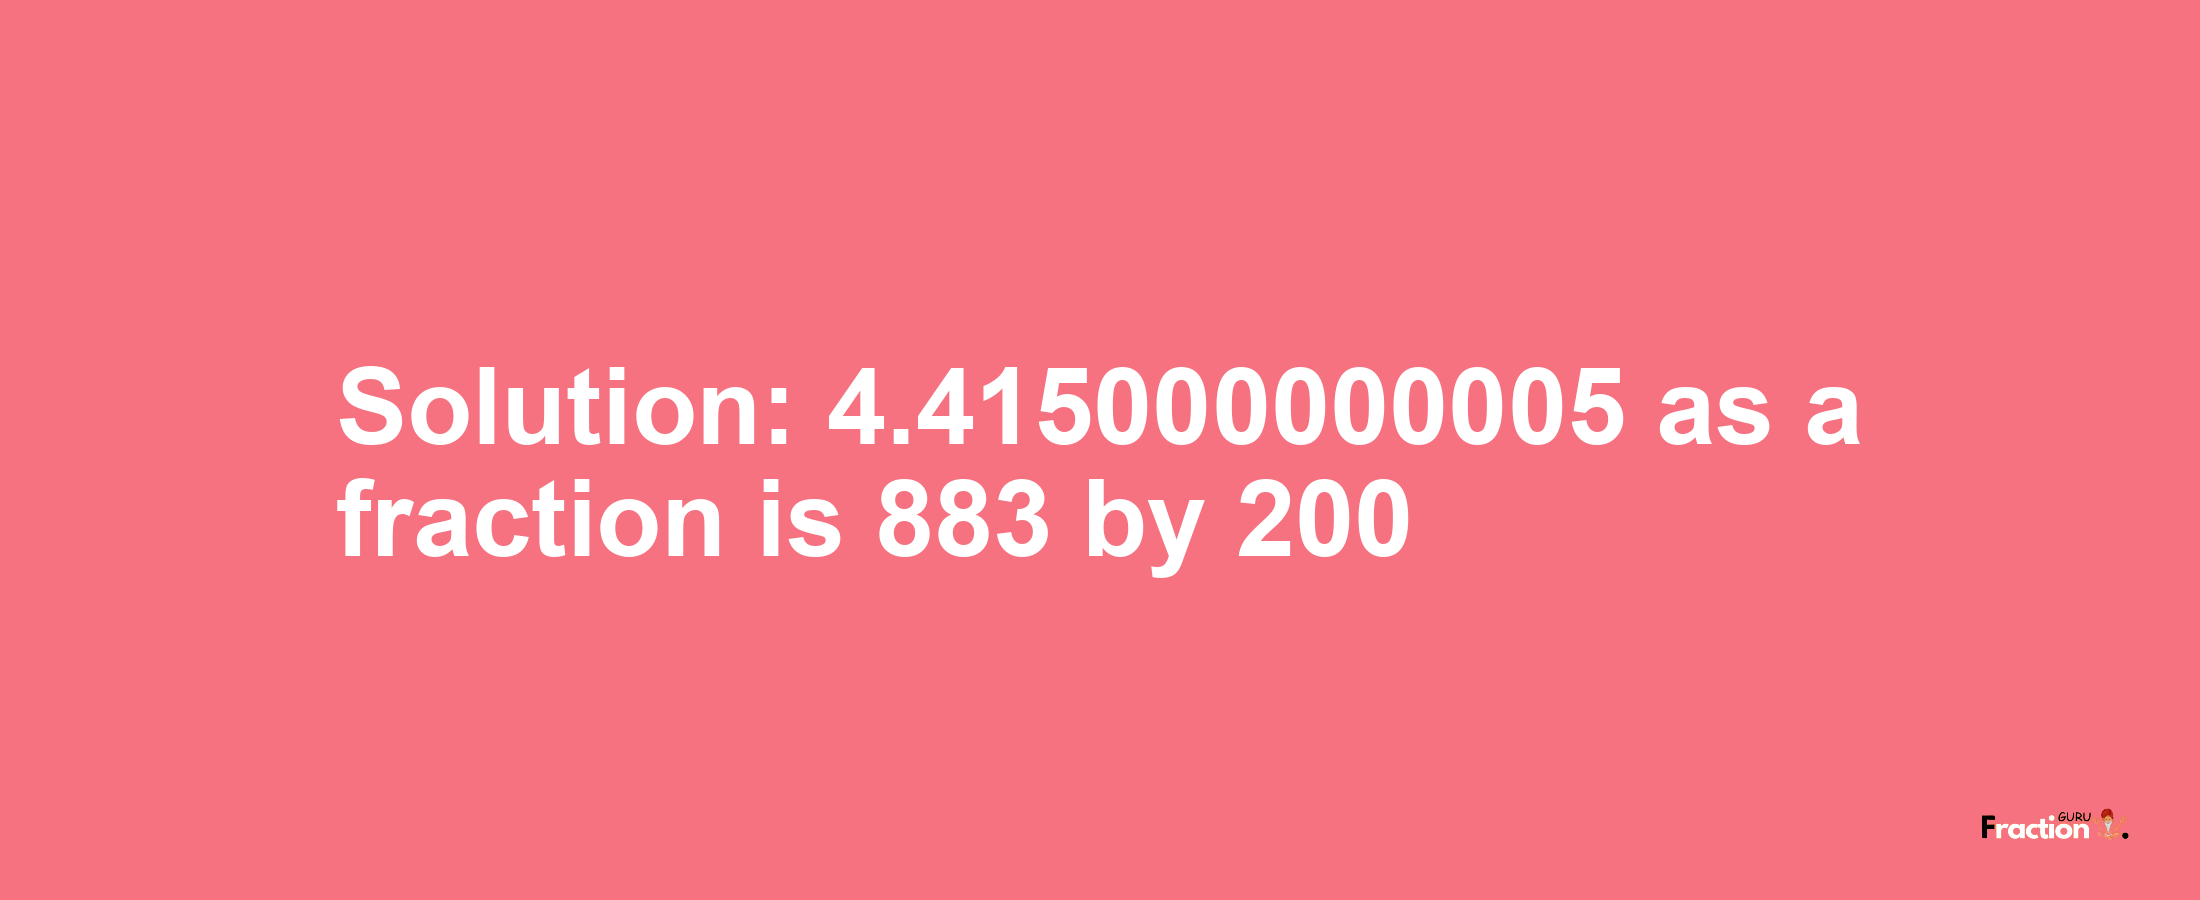 Solution:4.415000000005 as a fraction is 883/200